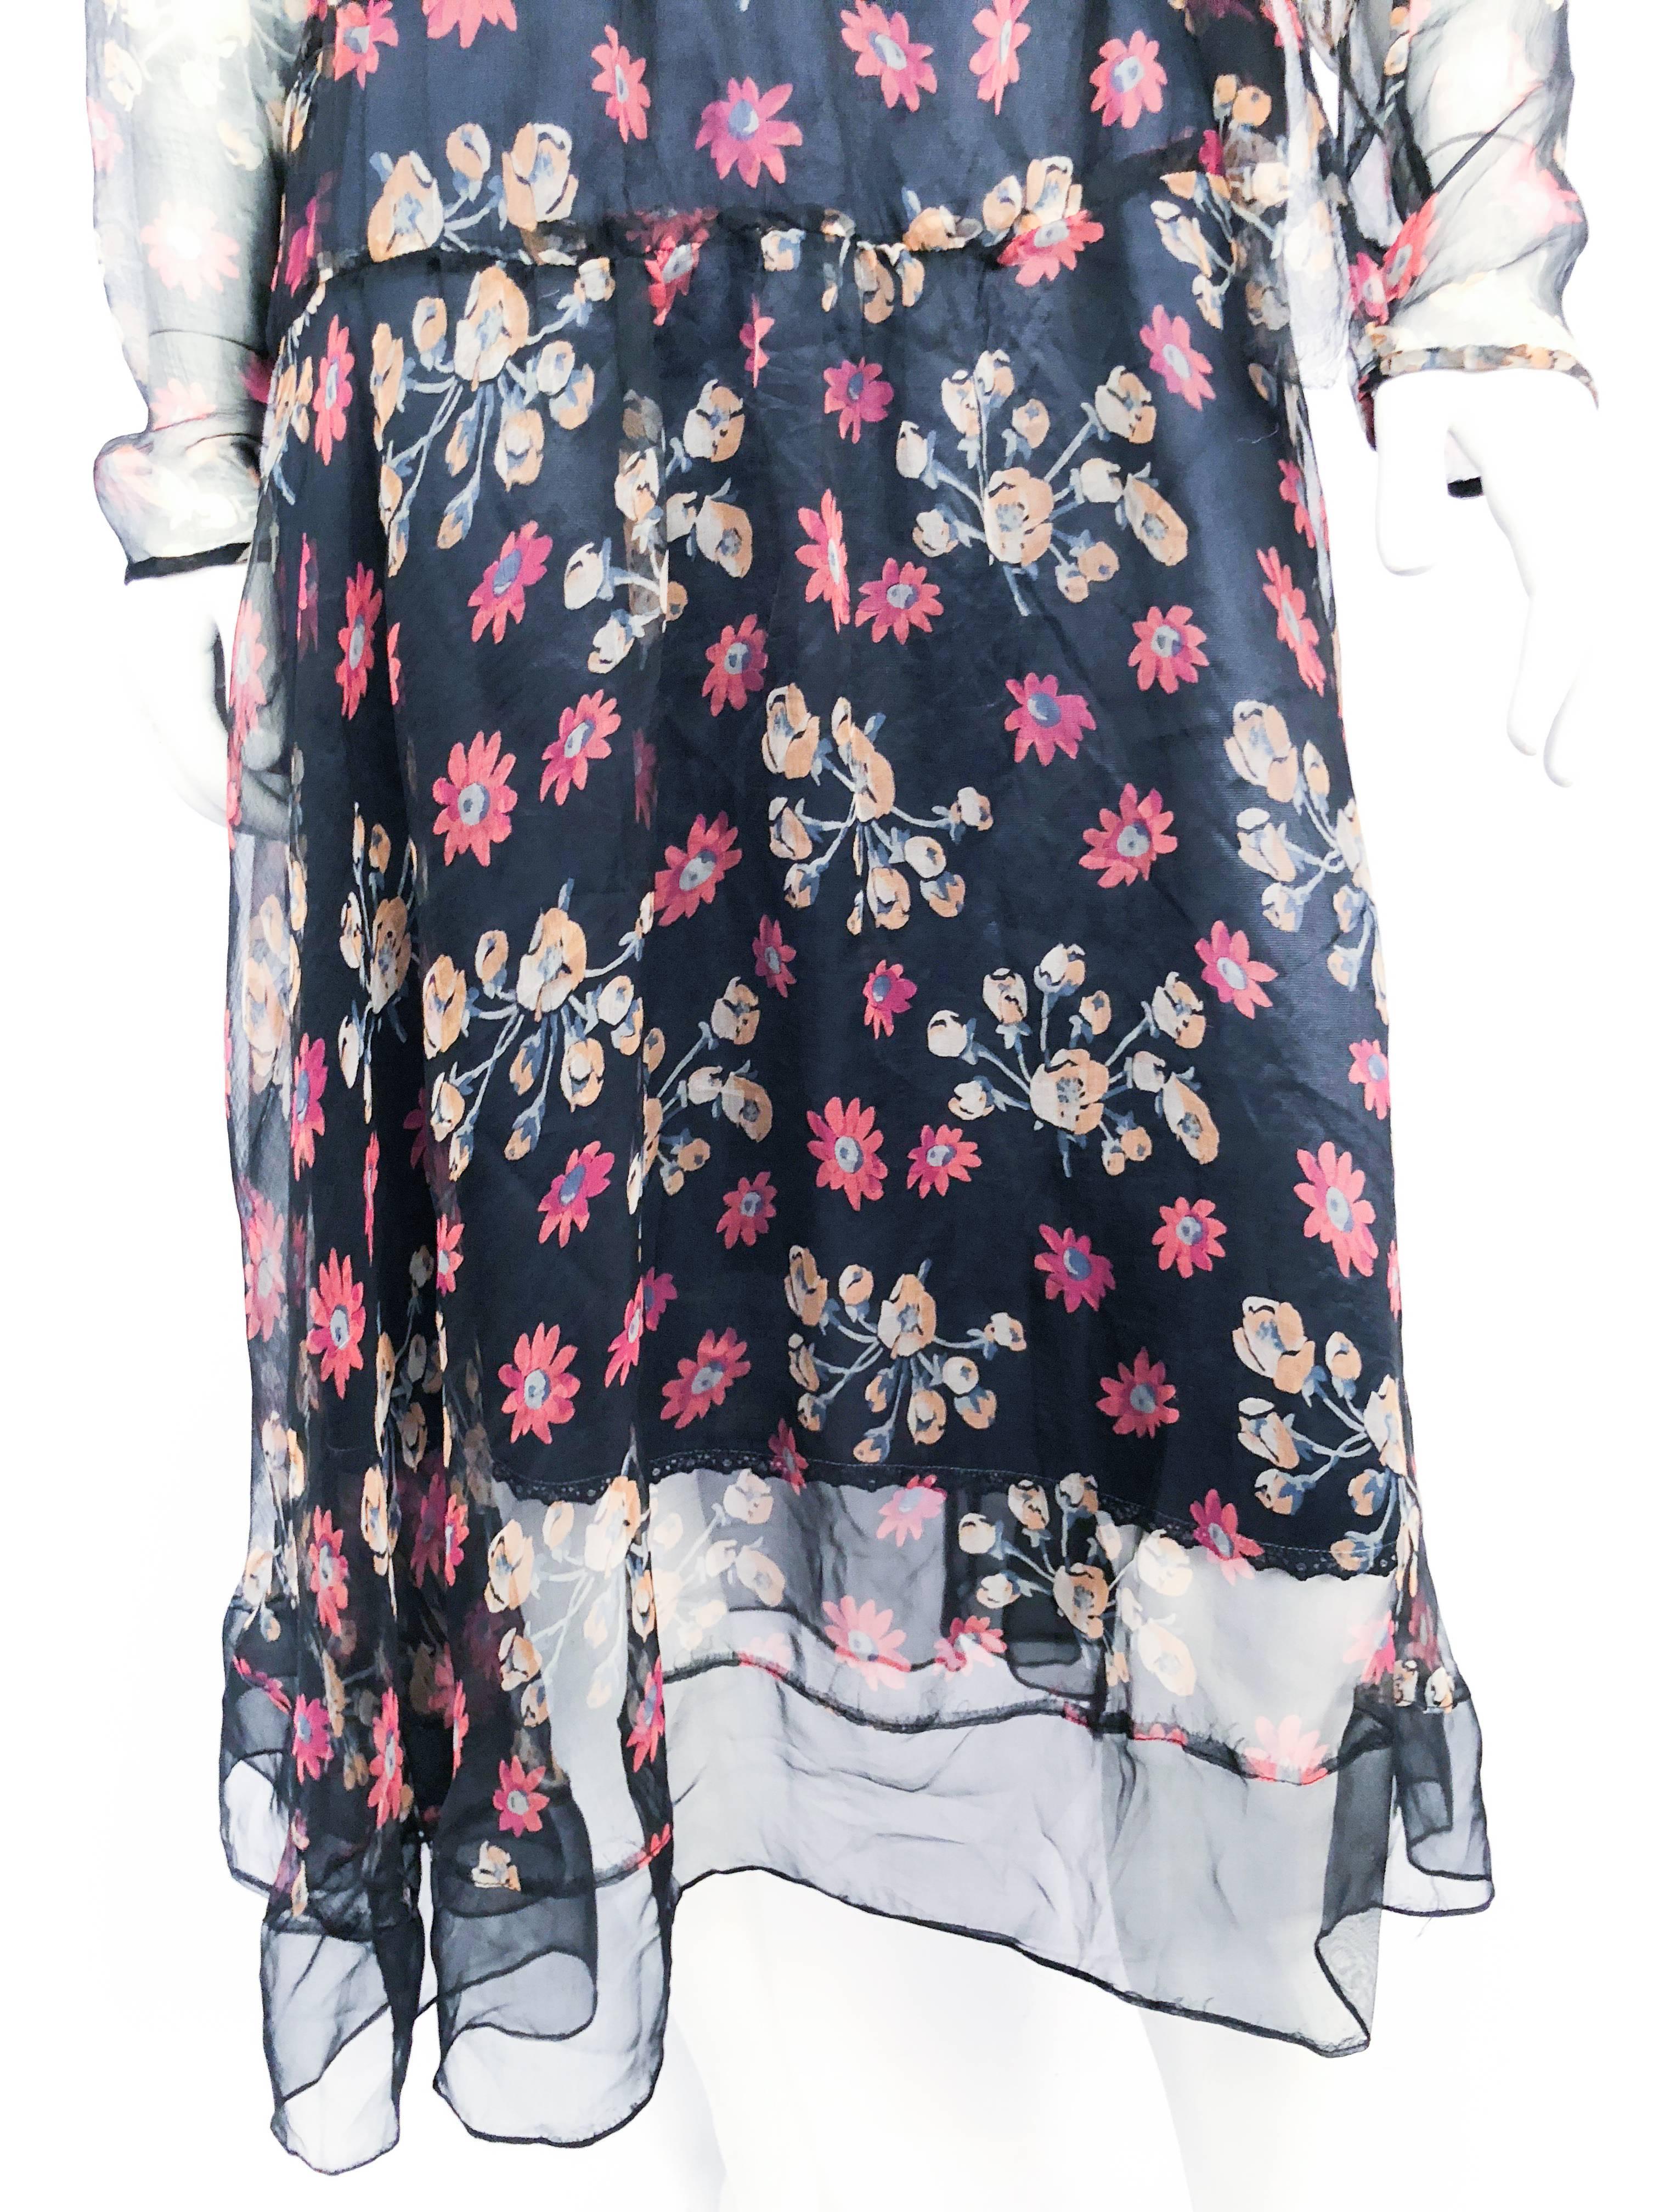 Women's Sheer Floral Printed Silk Chiffon Dress, 1920s  For Sale